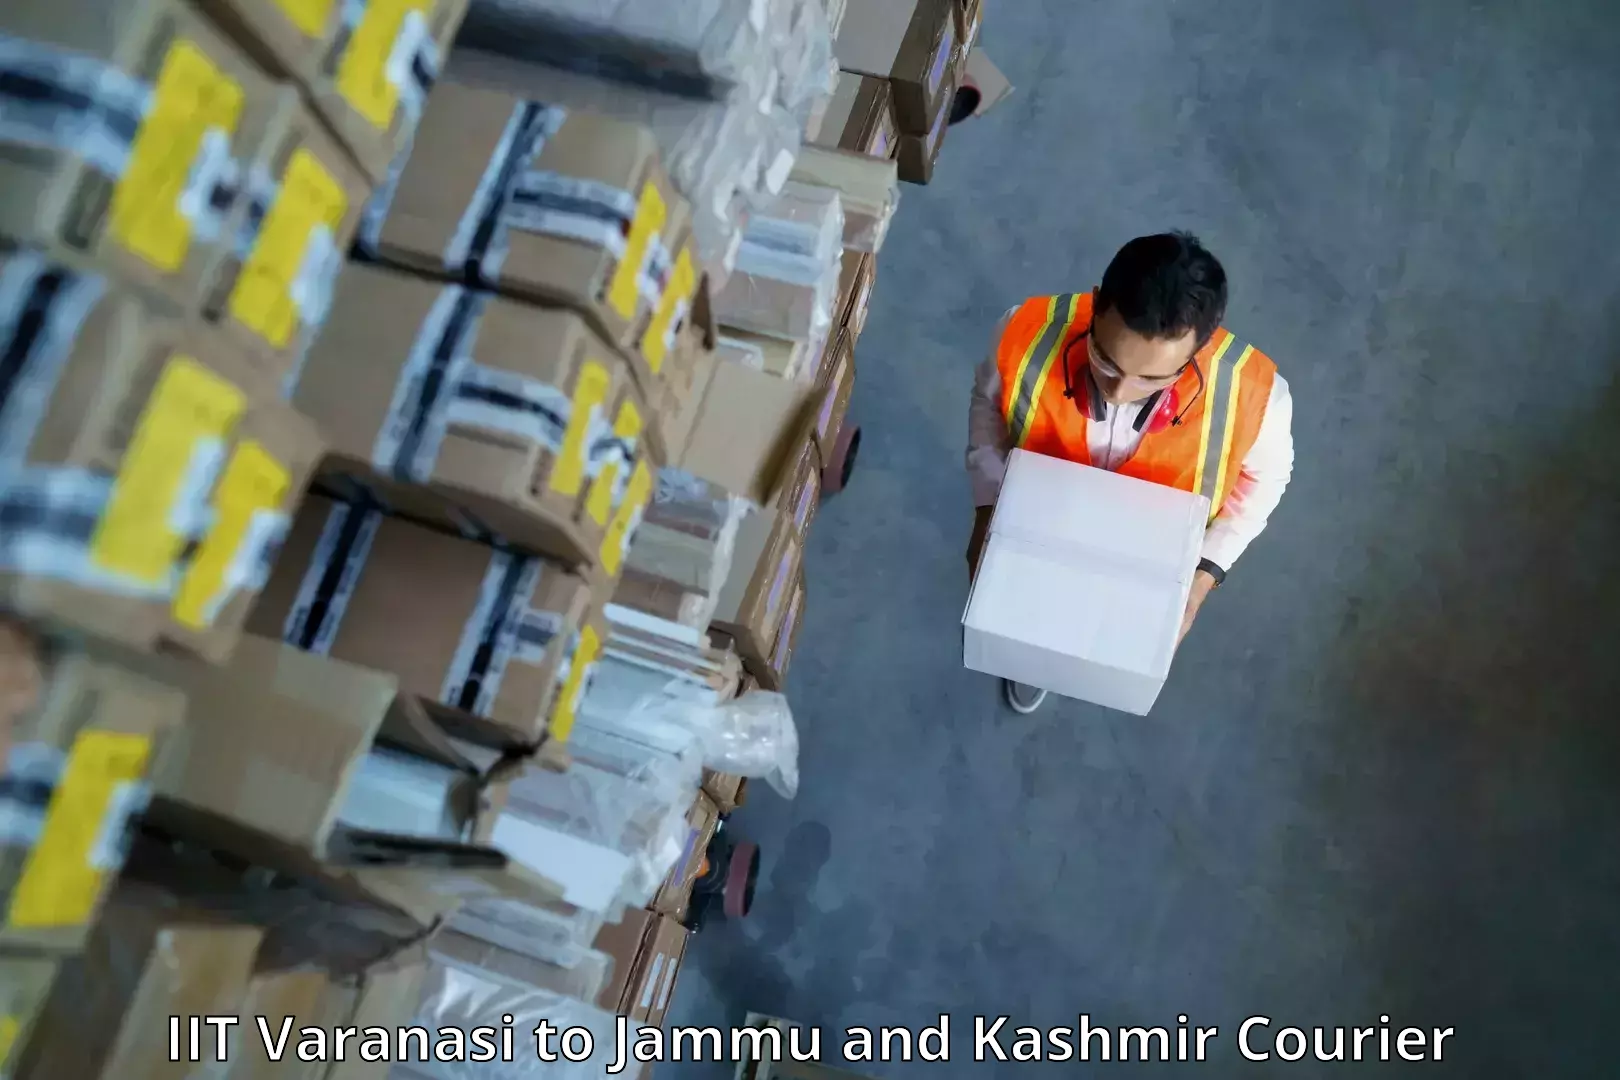 Professional courier services IIT Varanasi to Anantnag